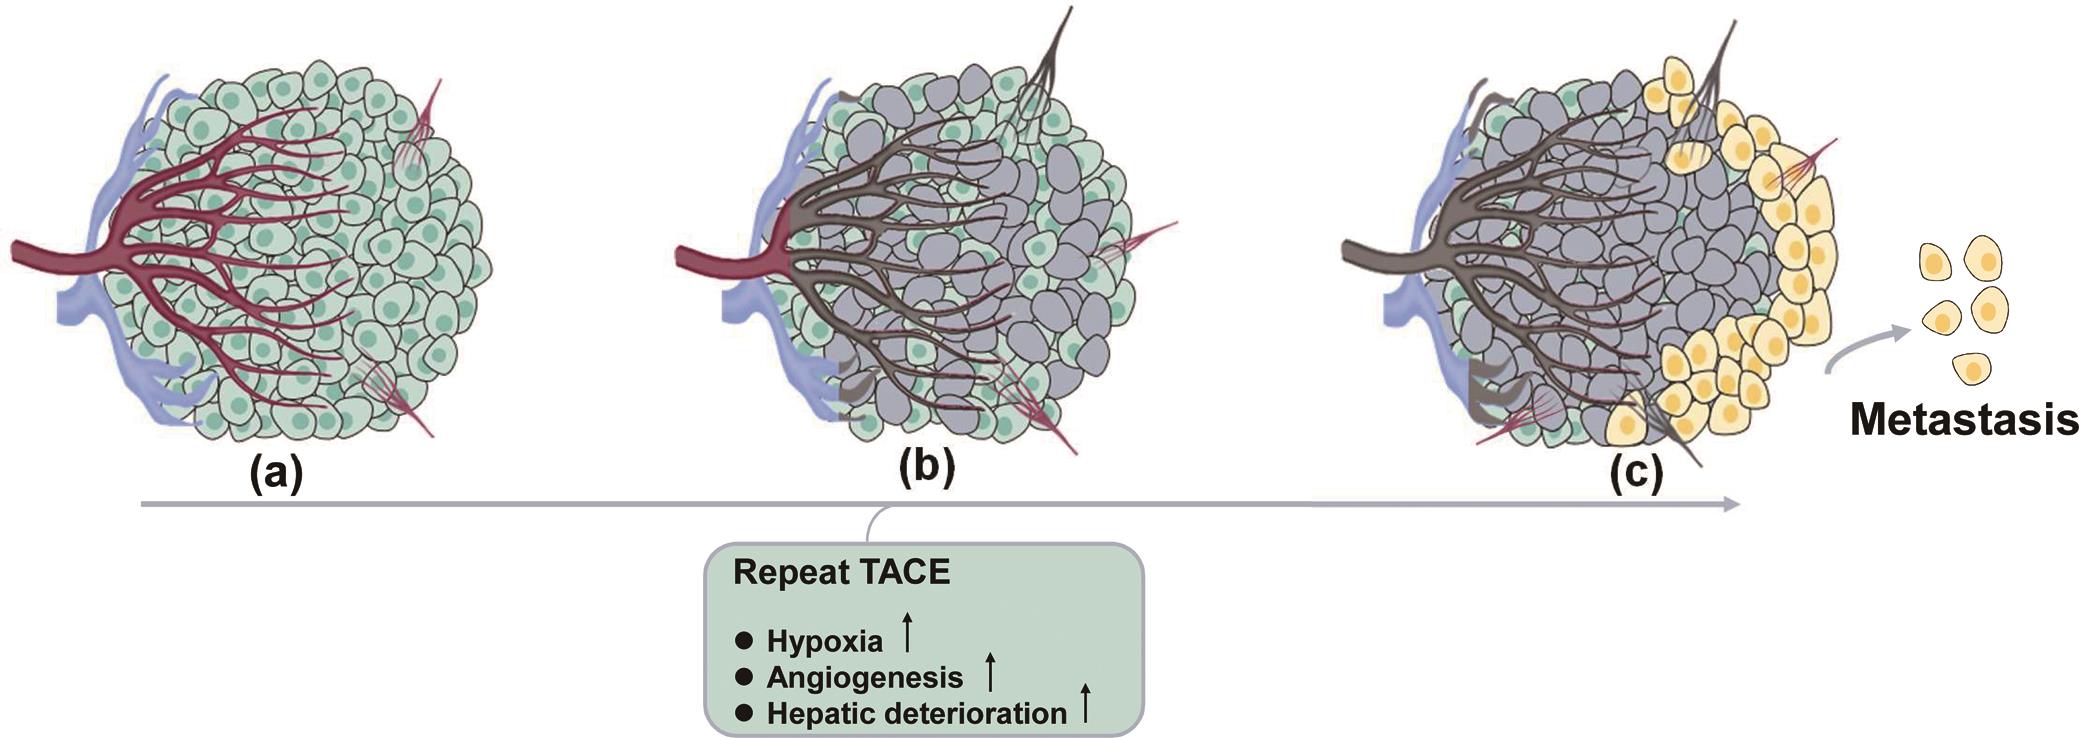 Pathological and physiological changes in HCCs with consecutive insufficient responses to TACE.